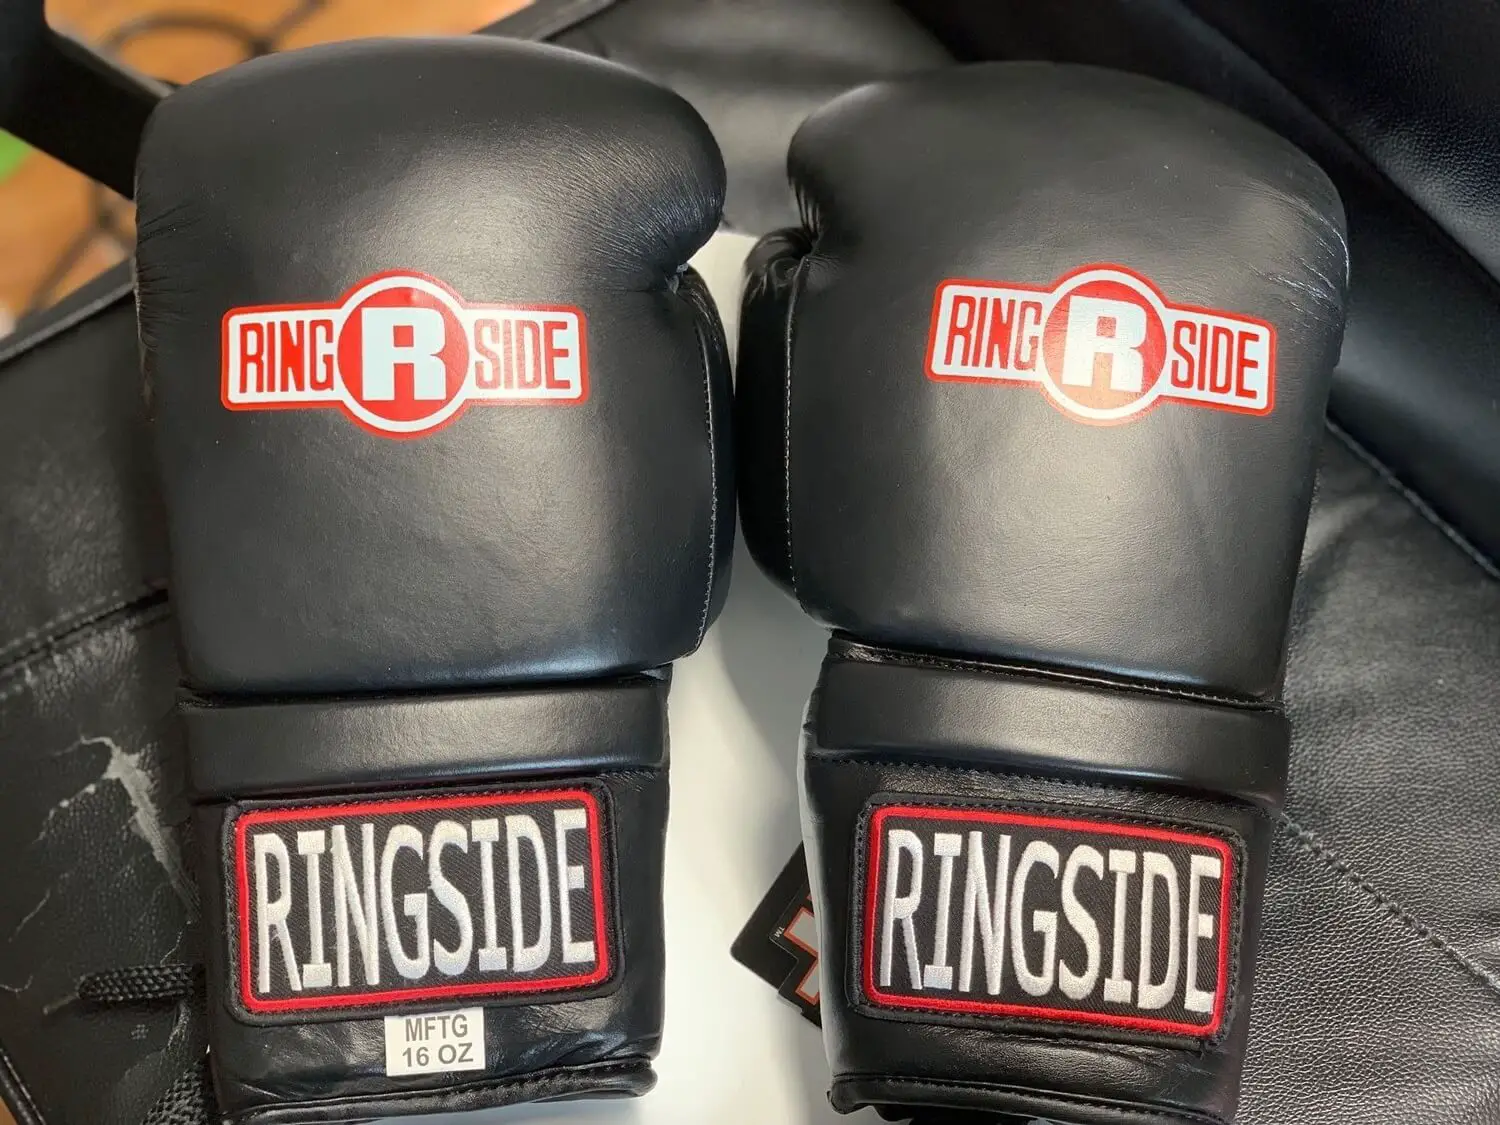 Ringside Lace IMF Tech Training Glove - Best boxing training gloves